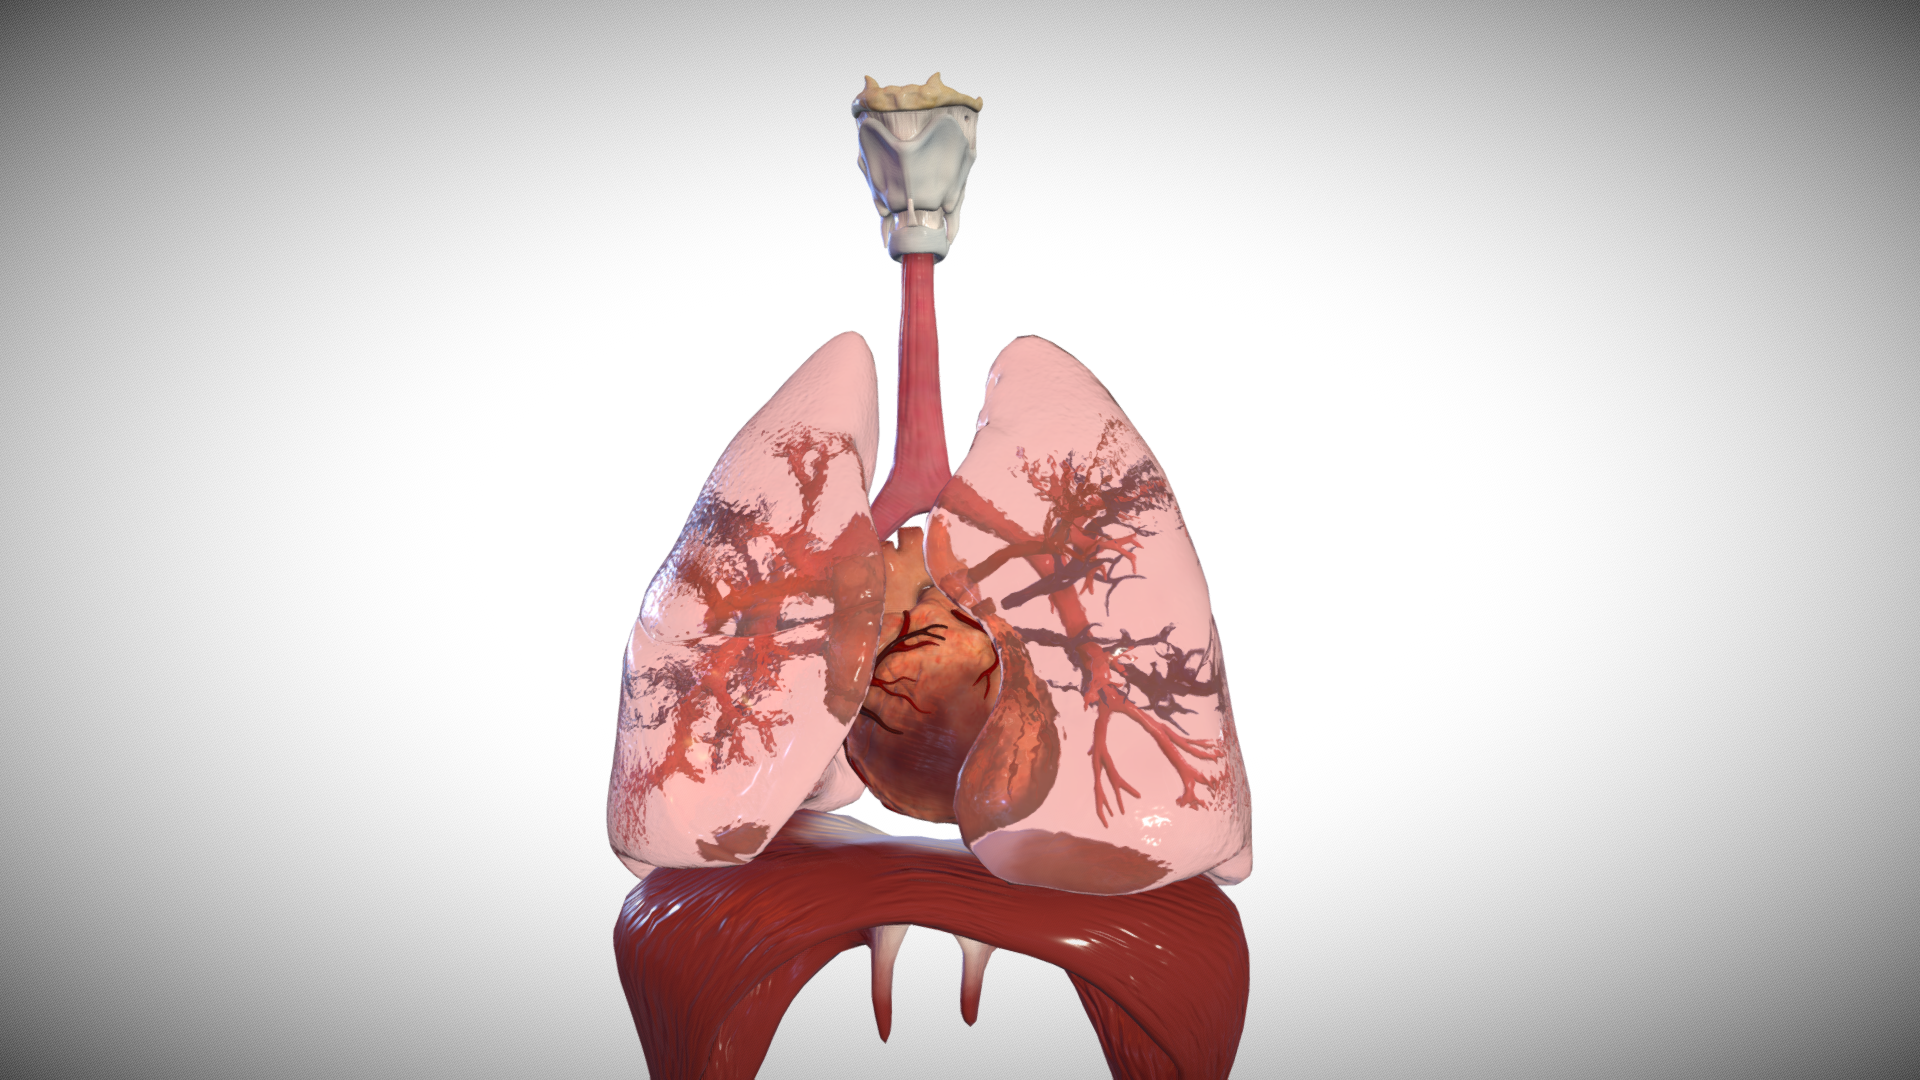 adult heart and lungs